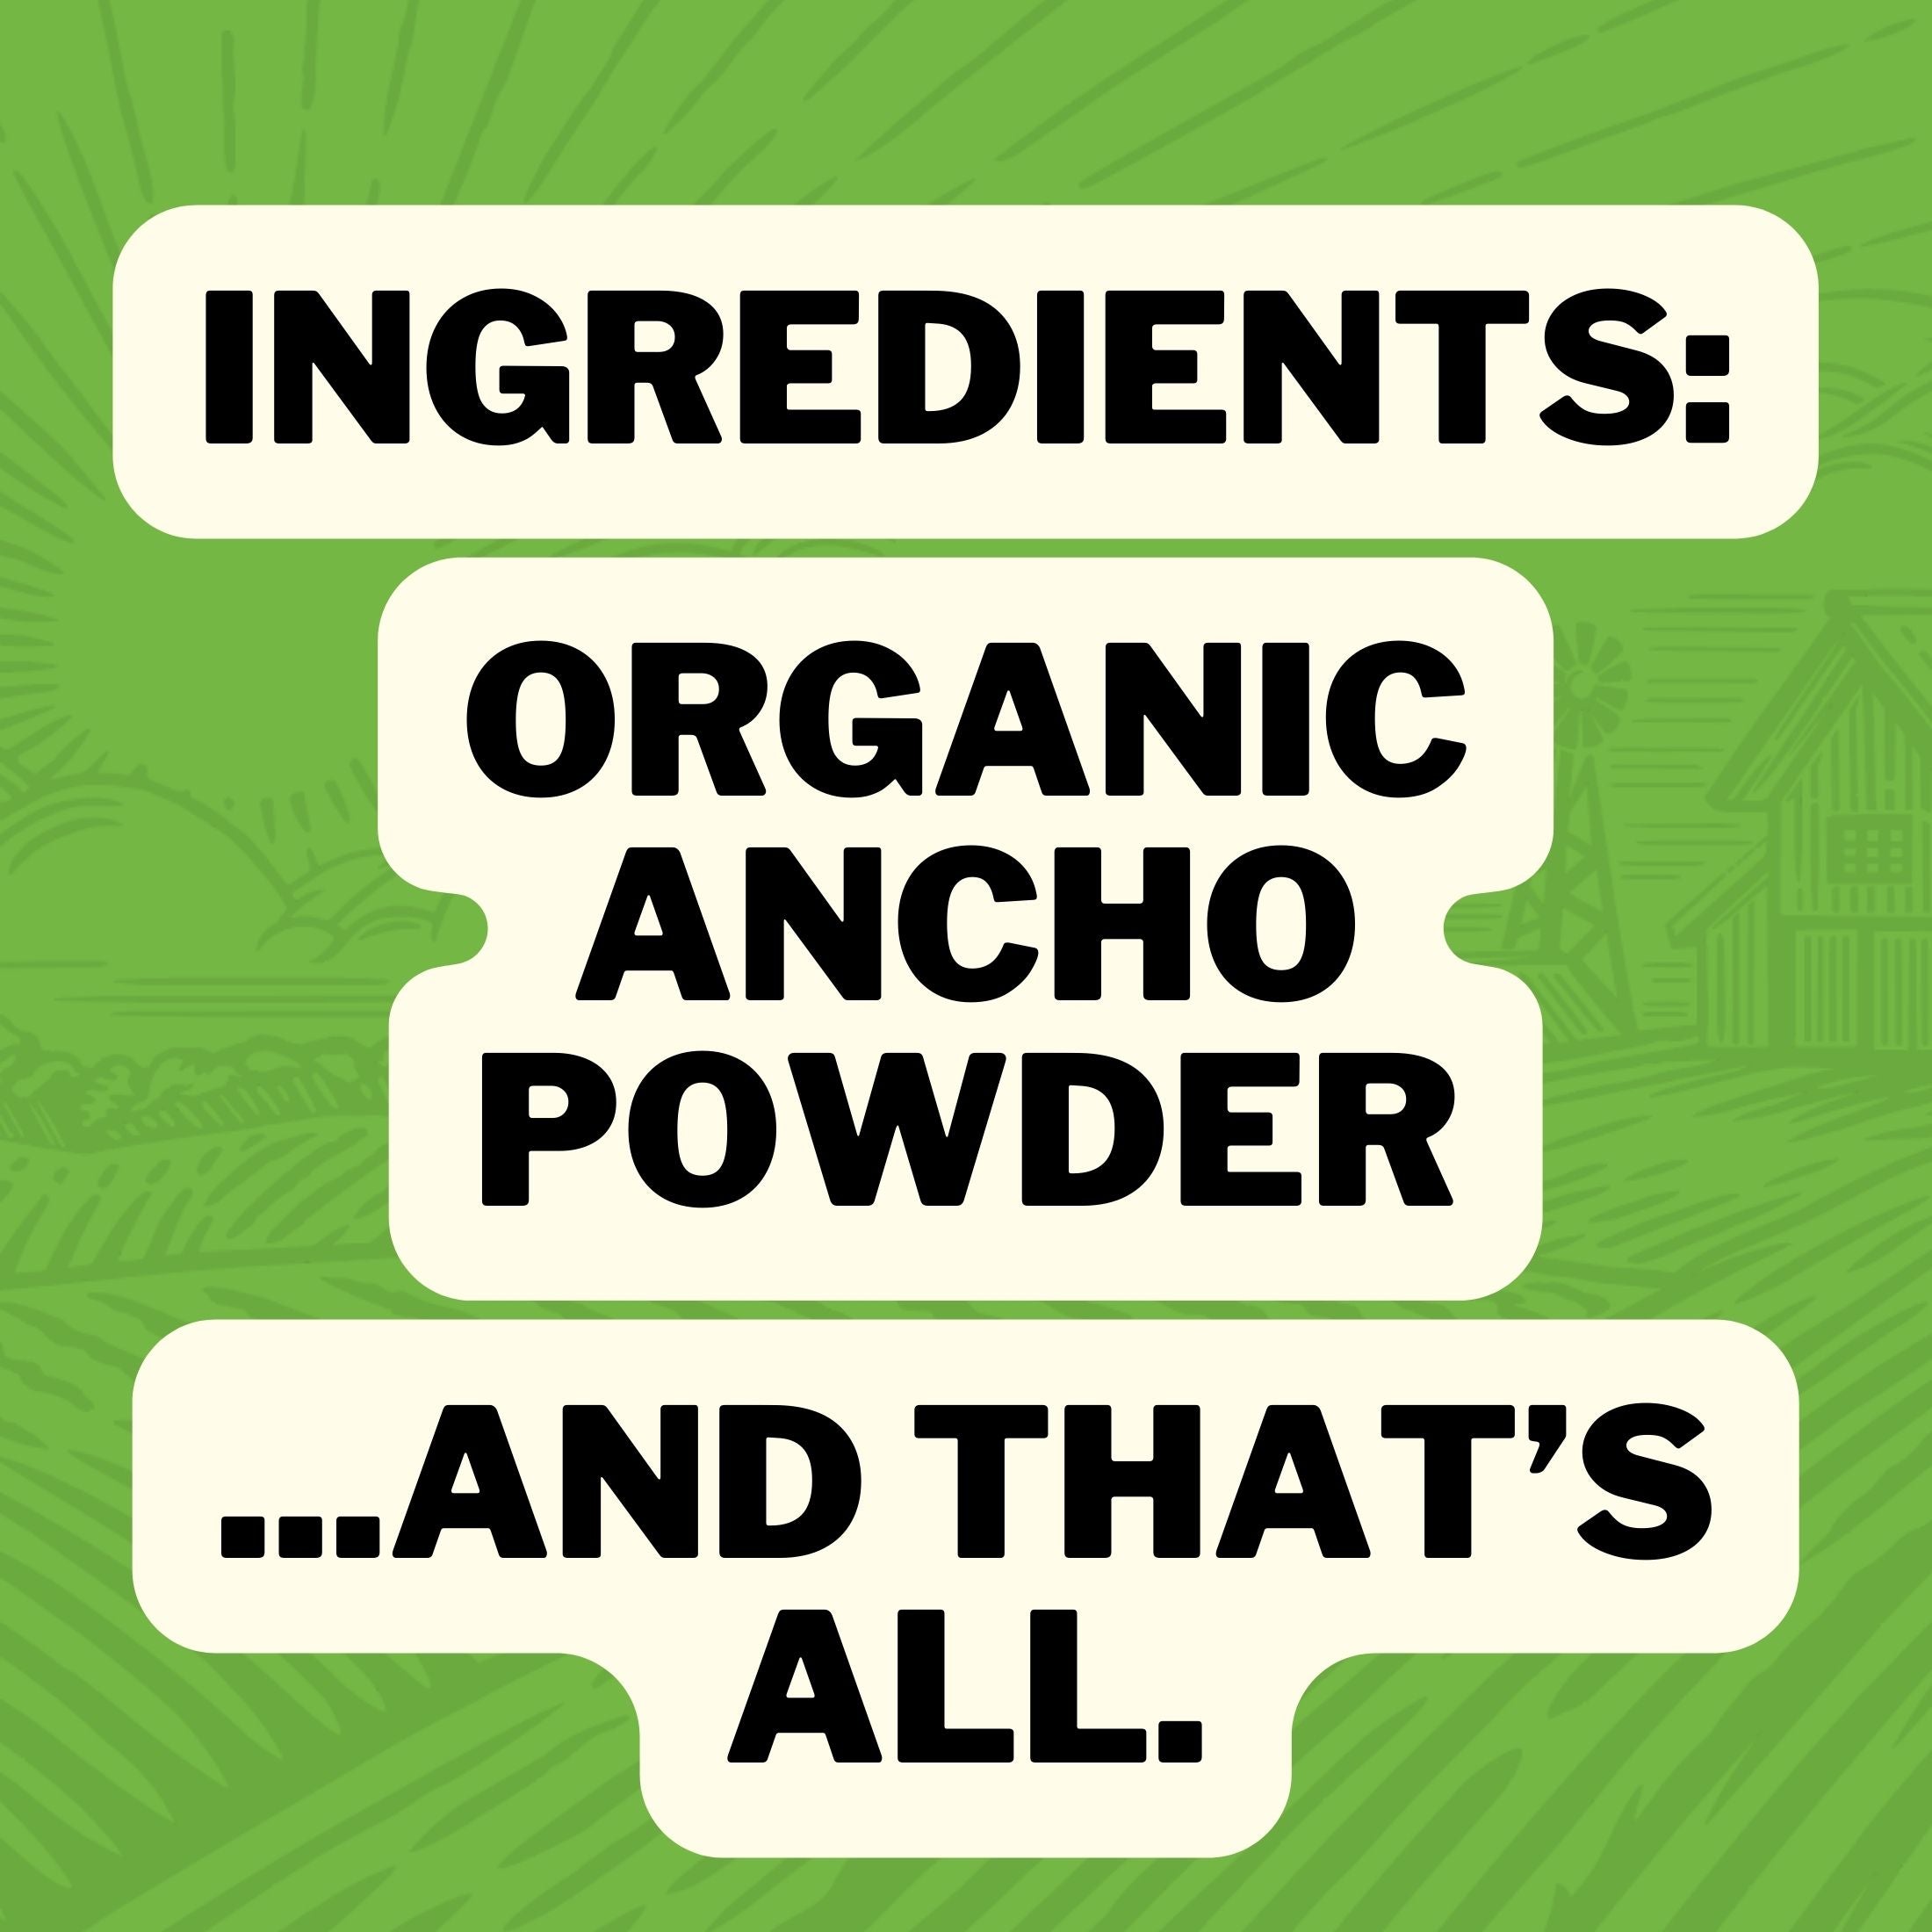 Ingredients: Organic Ancho Powder ... And That's All.